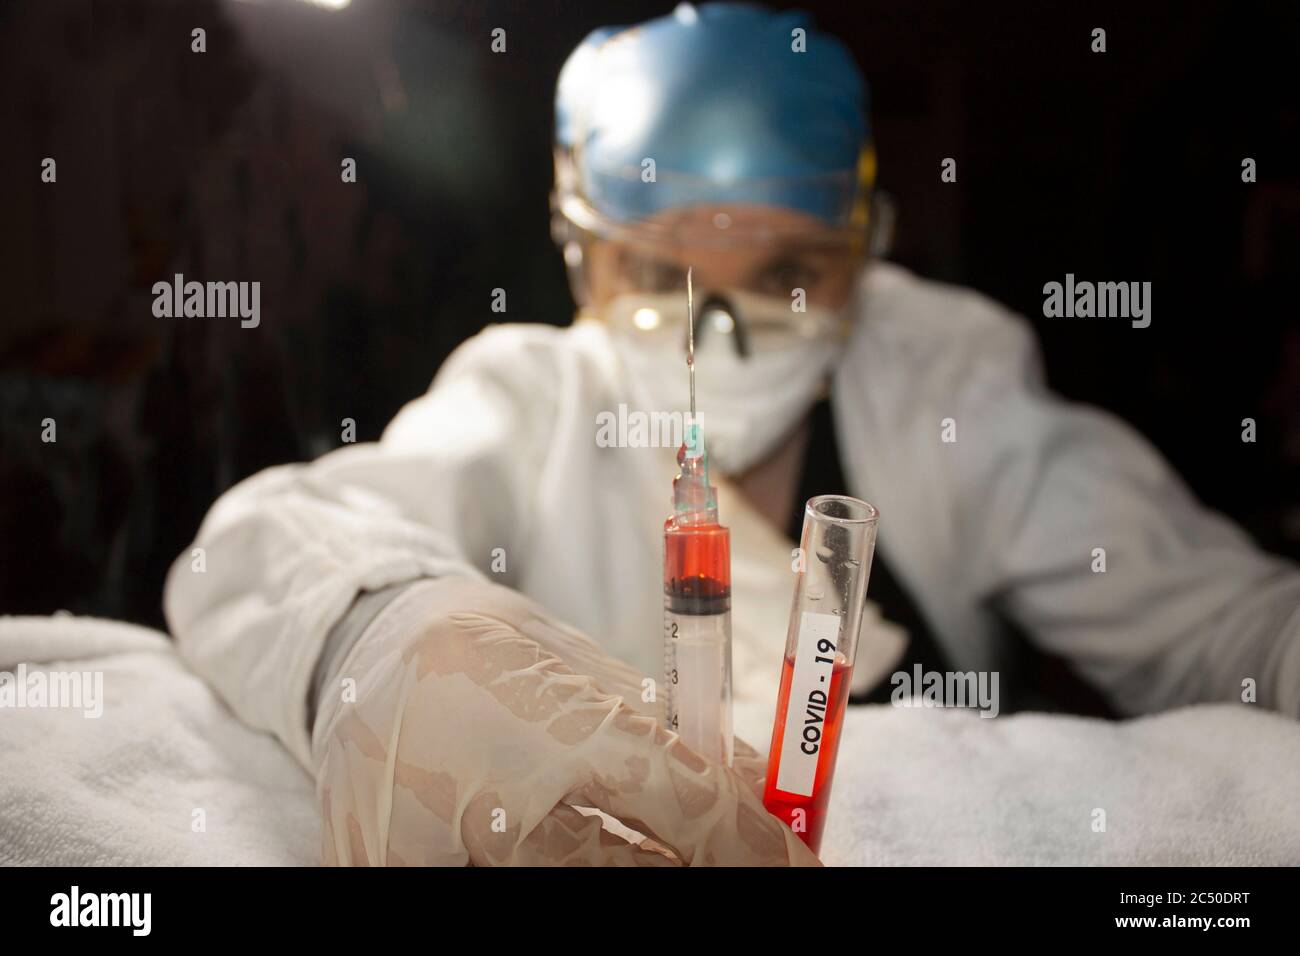 Scientist's hand equipped with gloves, glasses, mouths, holding test tube and syringe containing covid-19 plasma for study of possible vaccine in Stock Photo